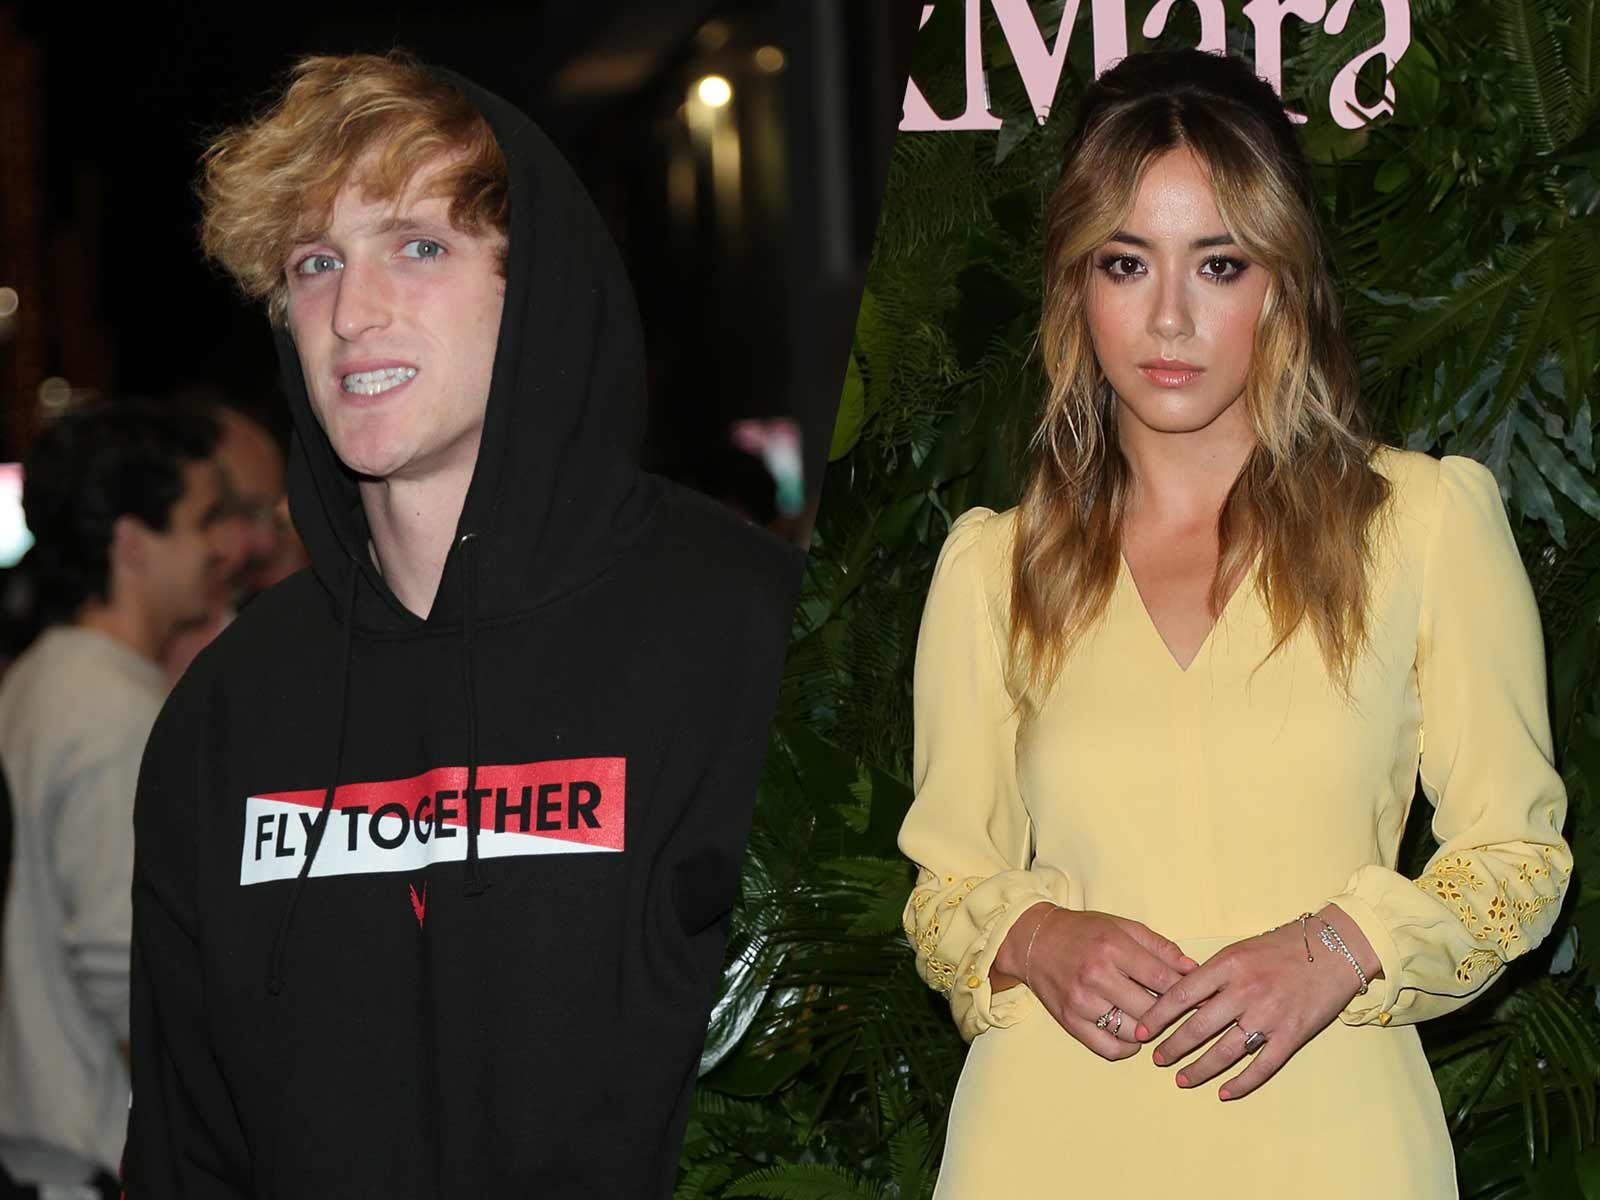 Logan Paul Girlfriend Logan Paul Is Frustrated And Upset With His